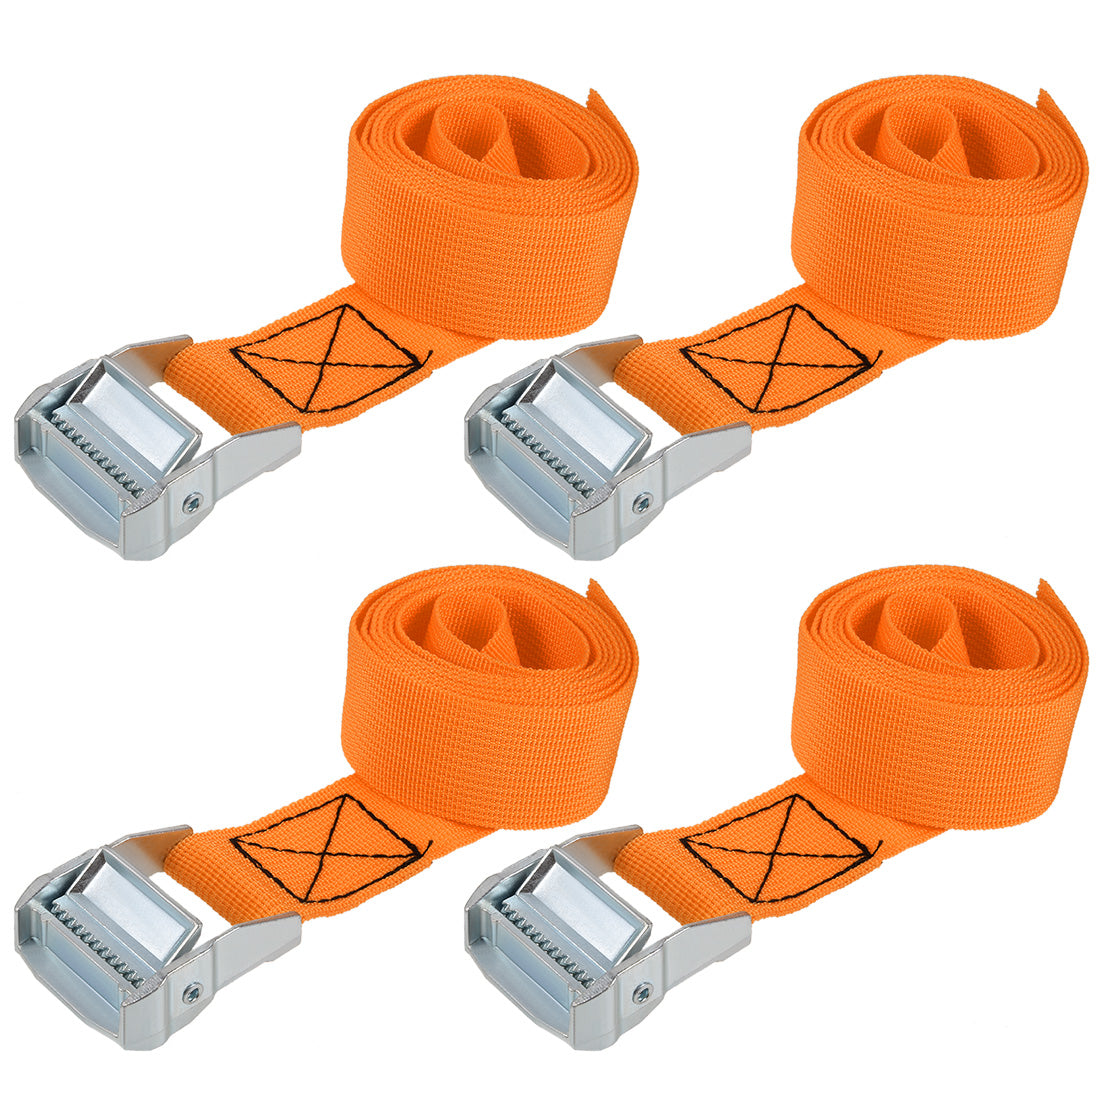 uxcell Uxcell Lashing Strap 1.5" x 5' Cargo Tie Down Straps with Cam Lock Buckle Up to 1100lbs Orange 4Pcs